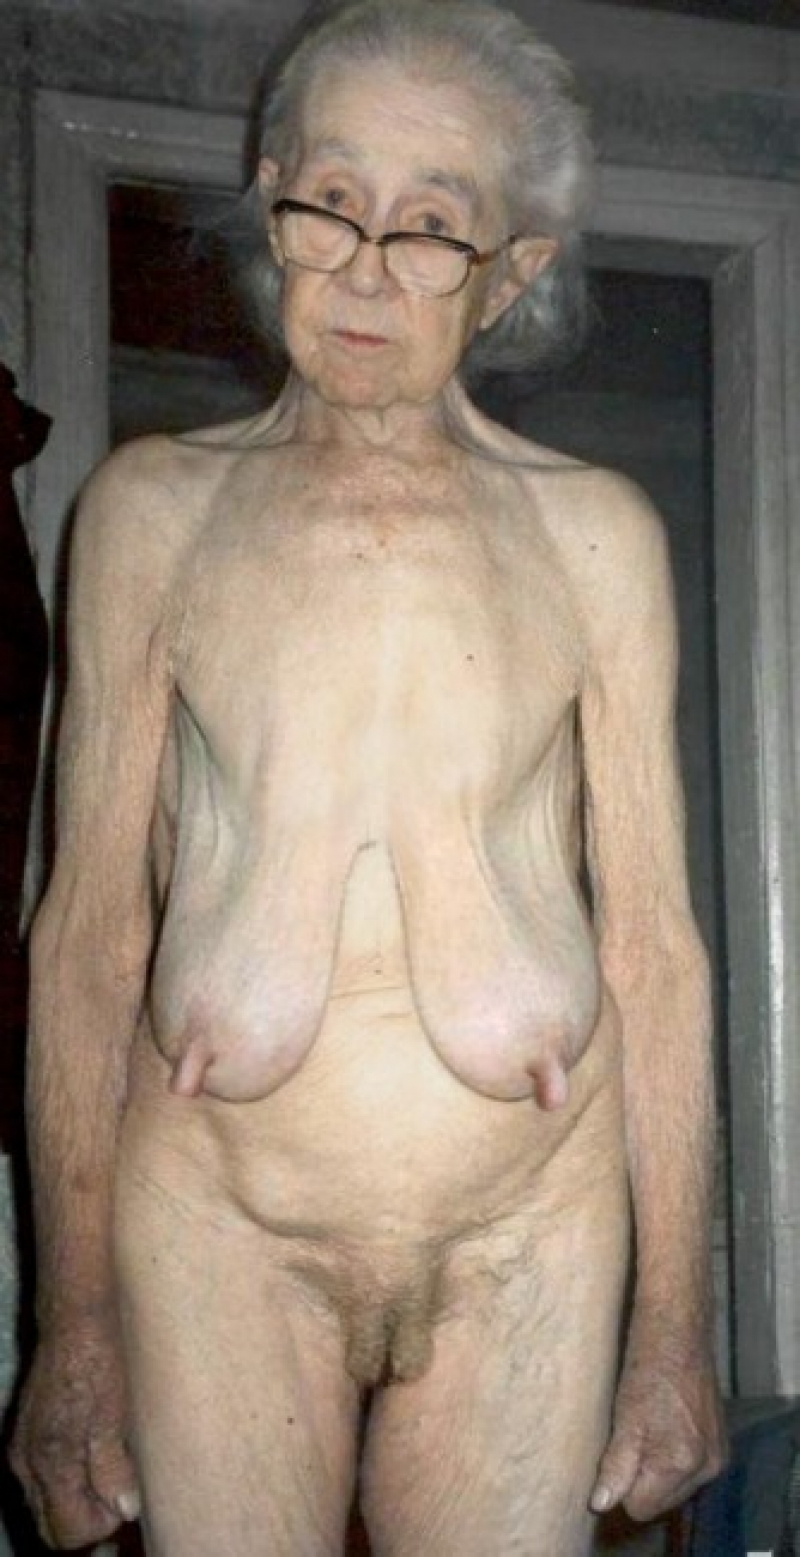 Very old granny nudes